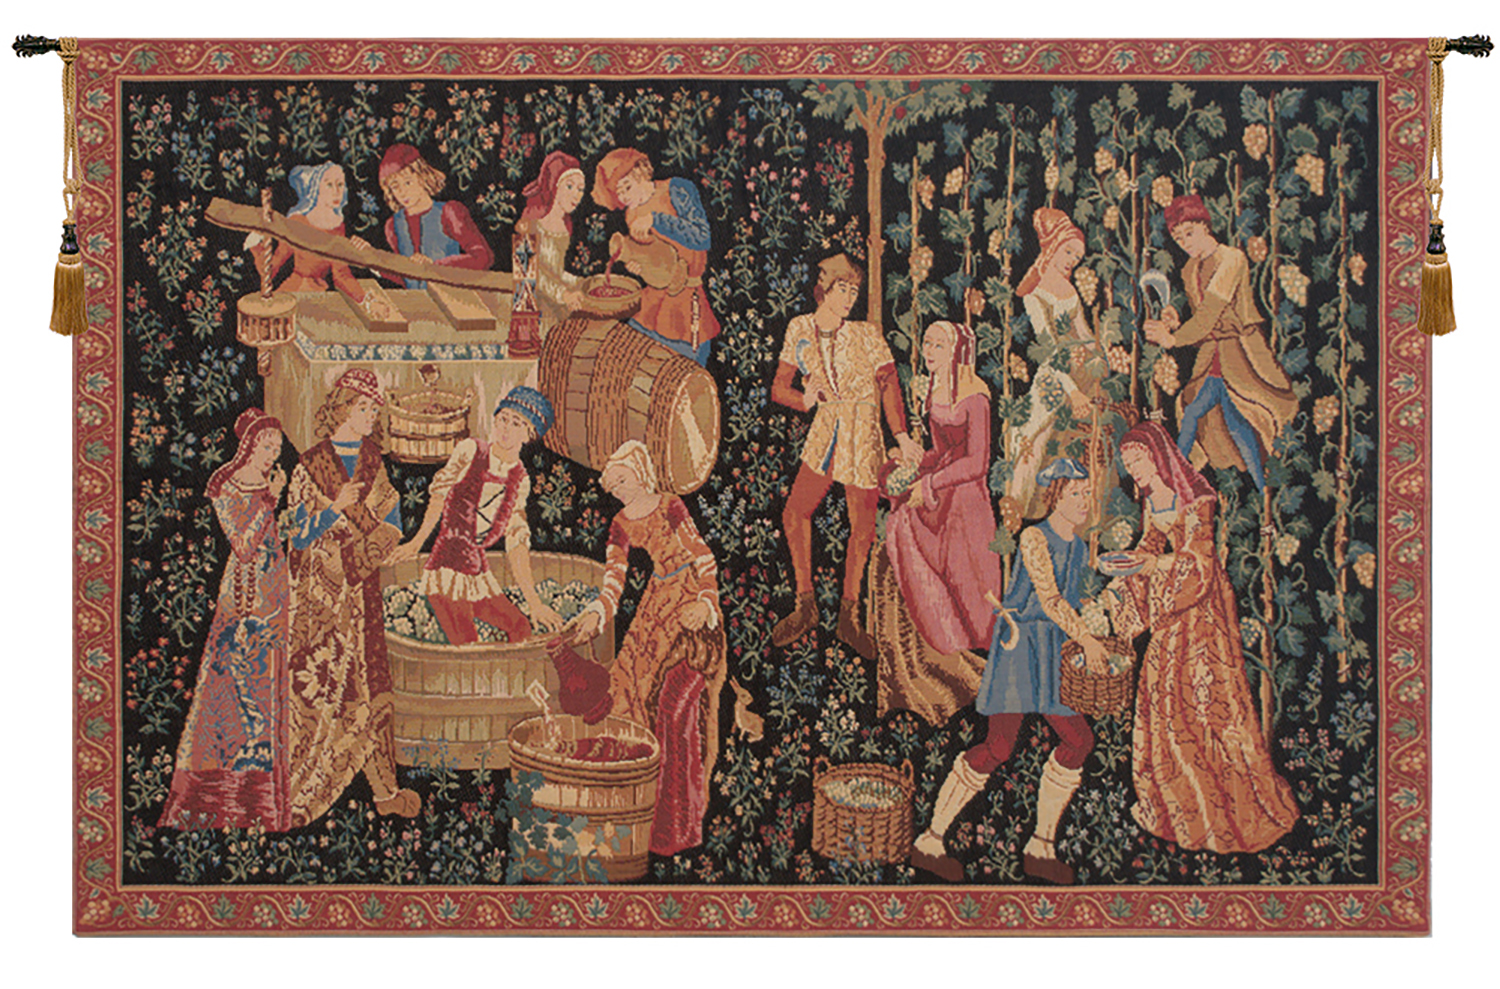 The Vintage Belgian Tapestry Wall Hanging - 28 in. x 18 in. CottonViscose  by Charlotte Home Furnishings